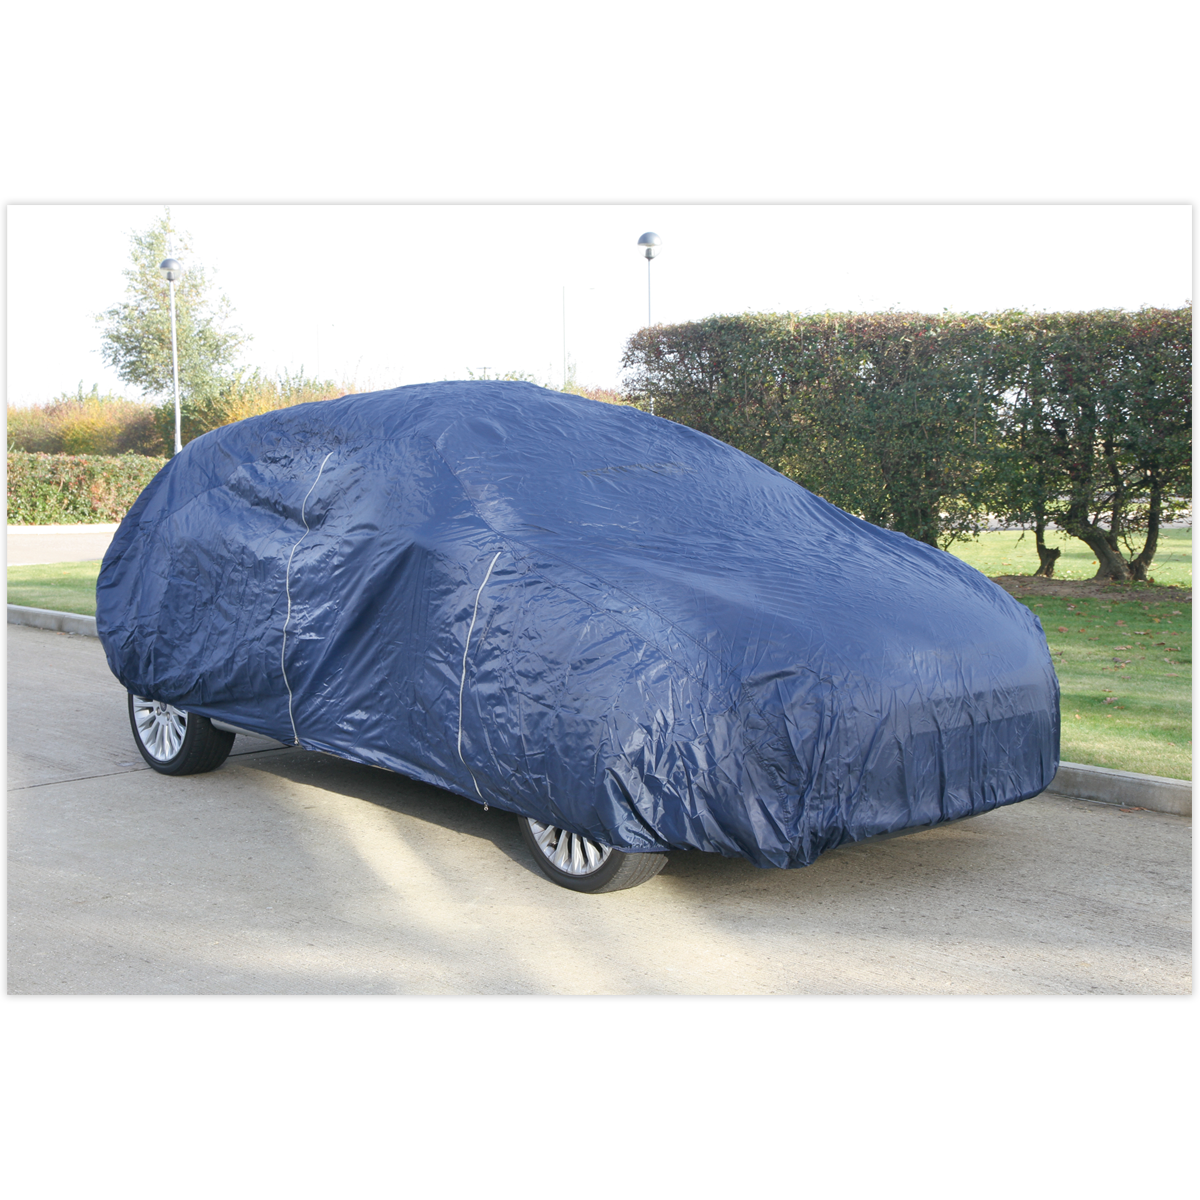 Car Cover Lightweight Small 3800 x 1540 x 1190mm - CCES - Farming Parts